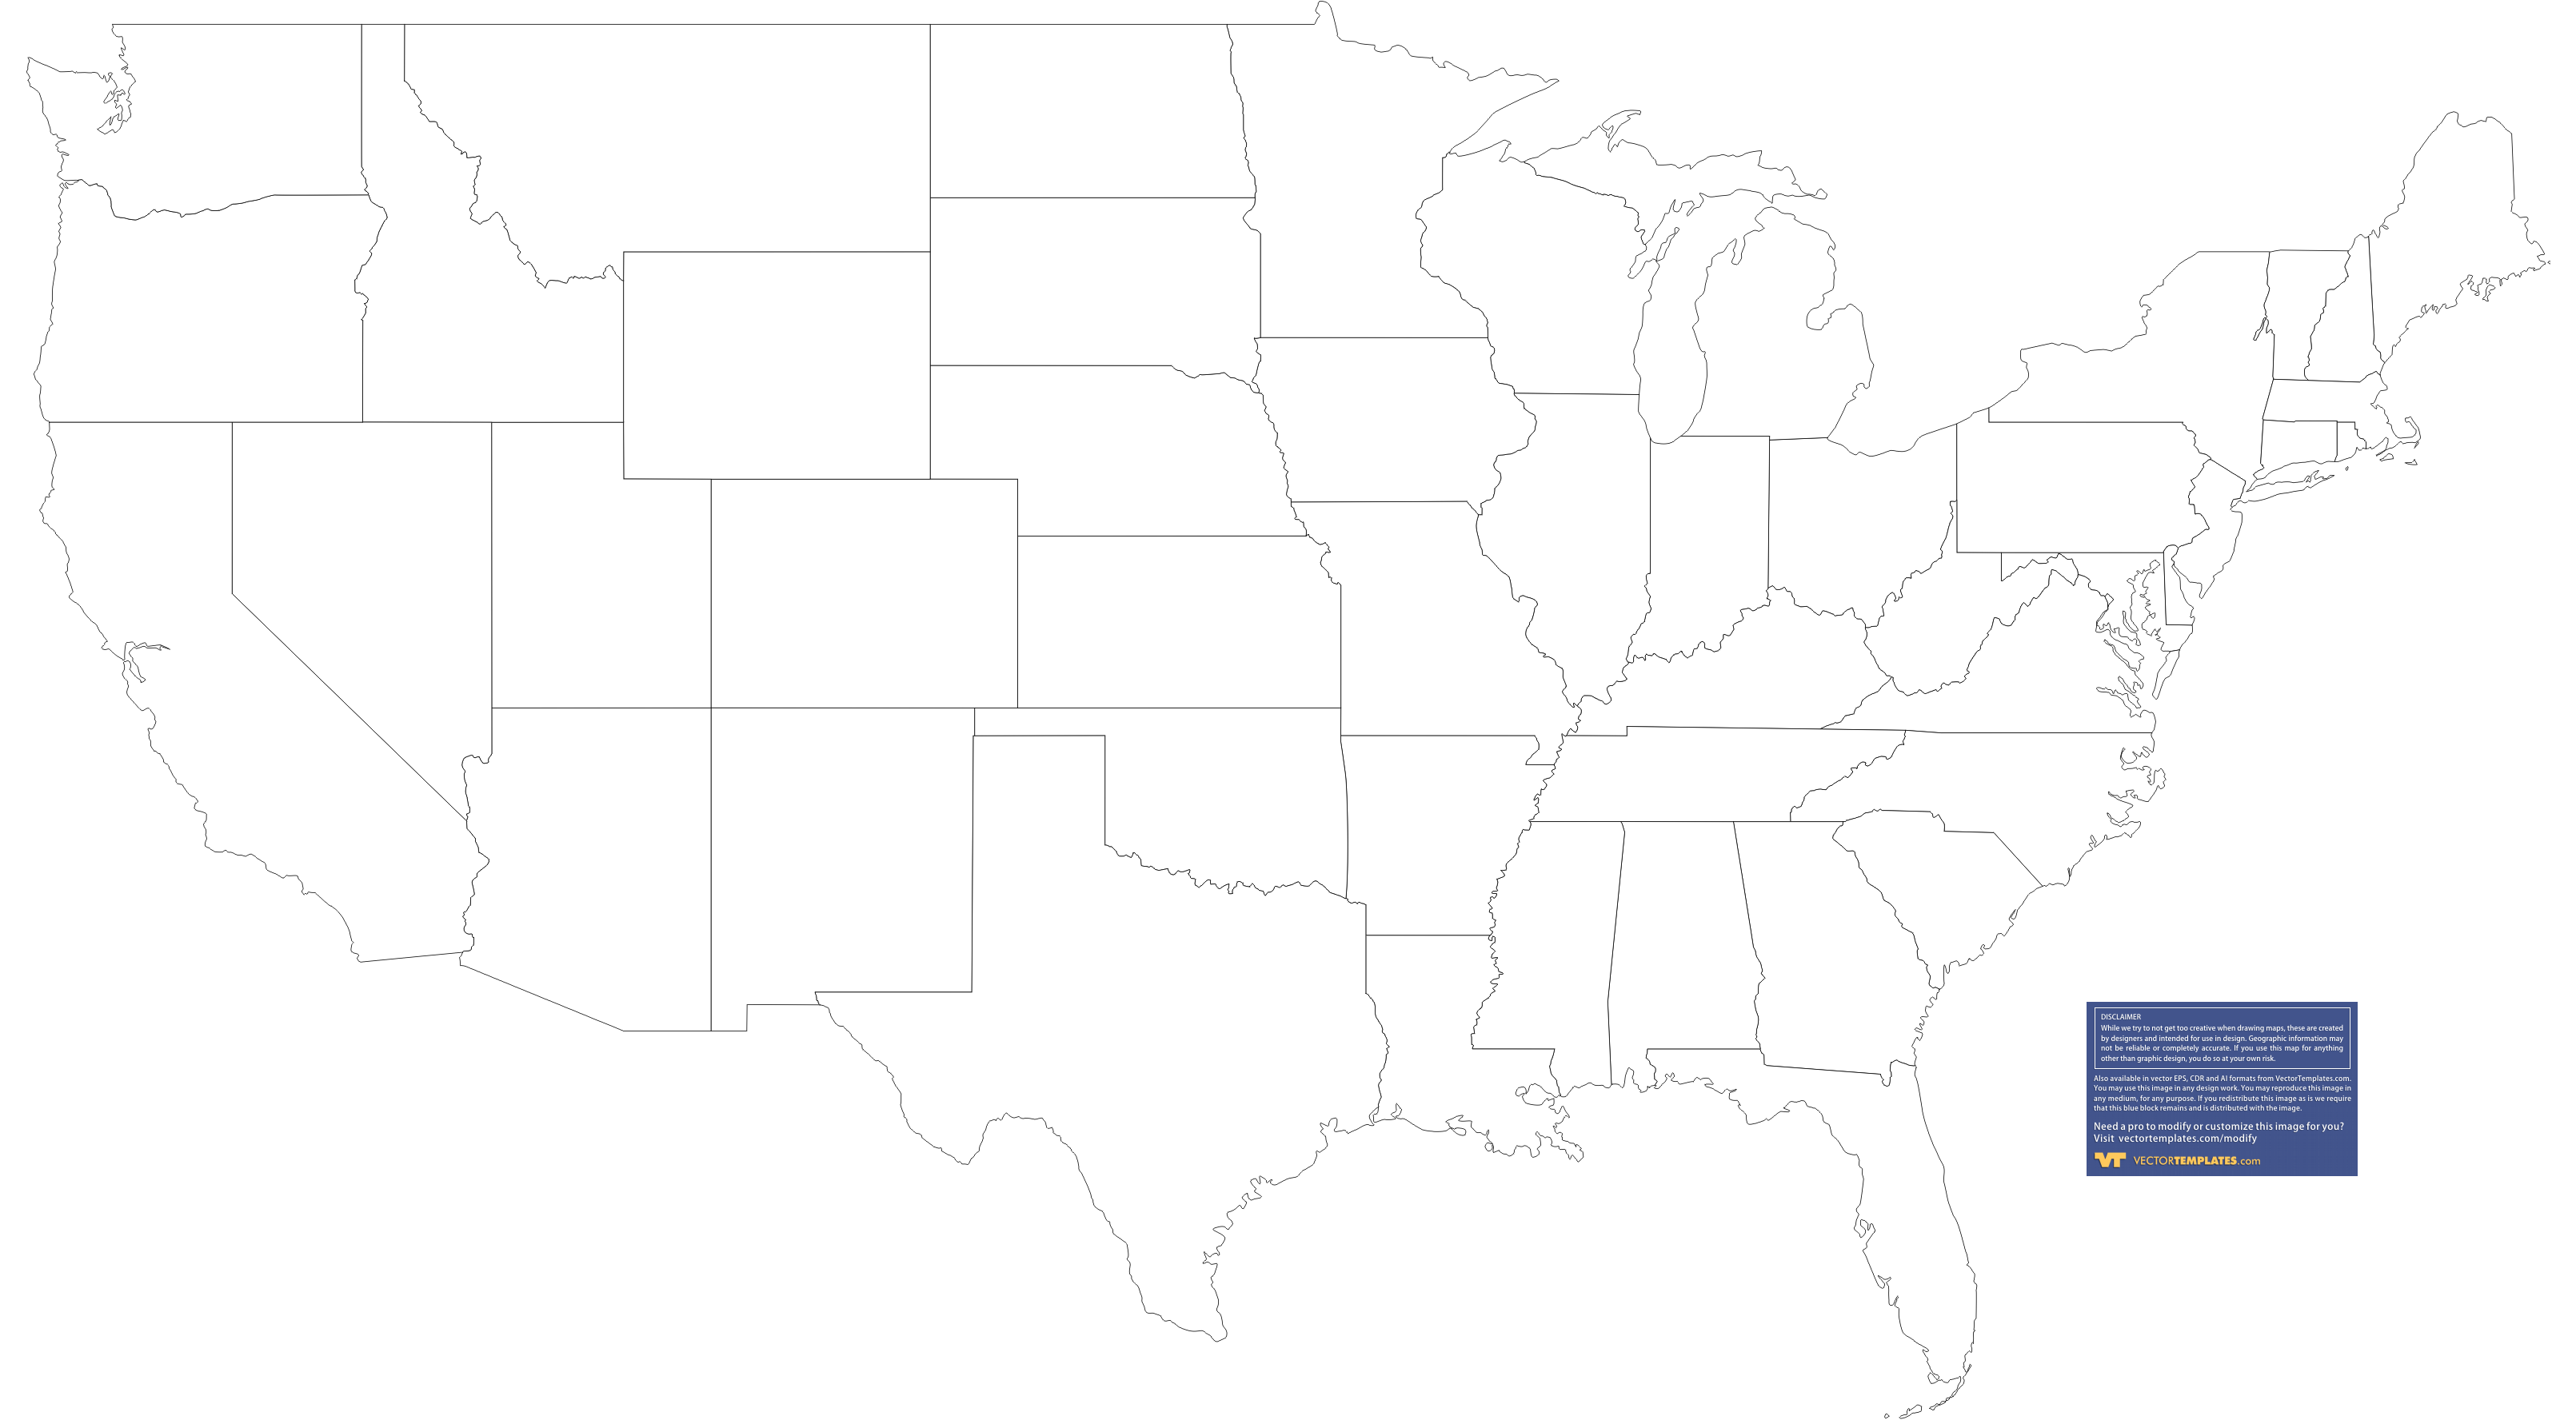 Us Map Outline Vector